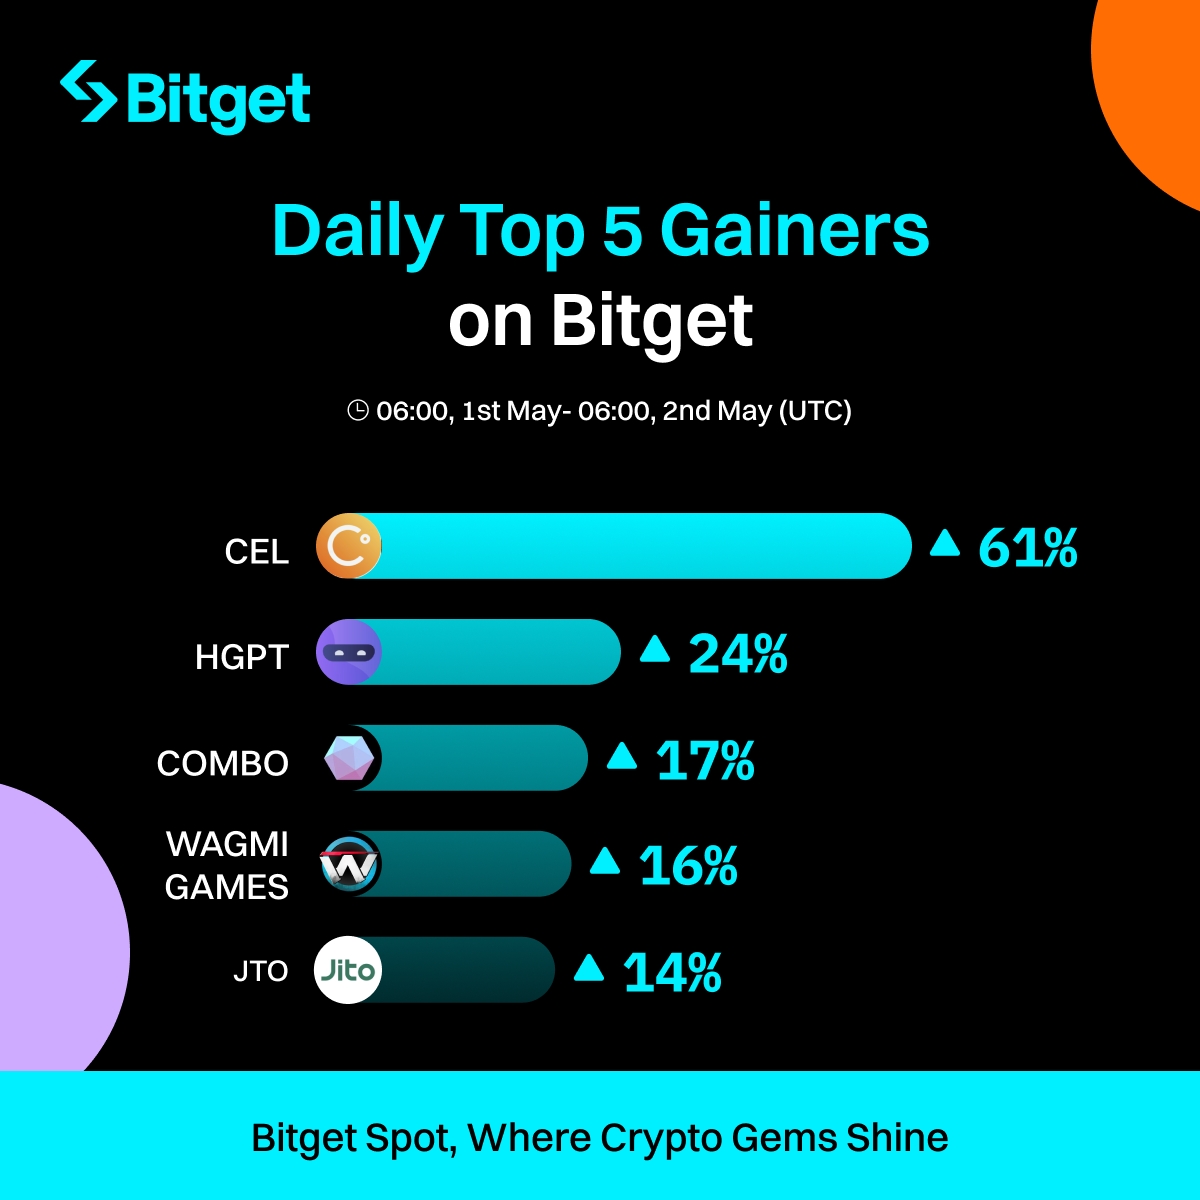 #BitgetSpot Daily Top 5 Gainers 🔥

$CEL                 🔺 61%  @CelsiusNetwork 
$HGPT             🔺 24% @hypergpt 
$COMBO        🔺 17%  @combonetworkio 
WAGIGAMES 🔺 16% @WagmiGameCo 
$JTO                 🔺 14% @jito_sol

Which coins are you trading today? ➡️